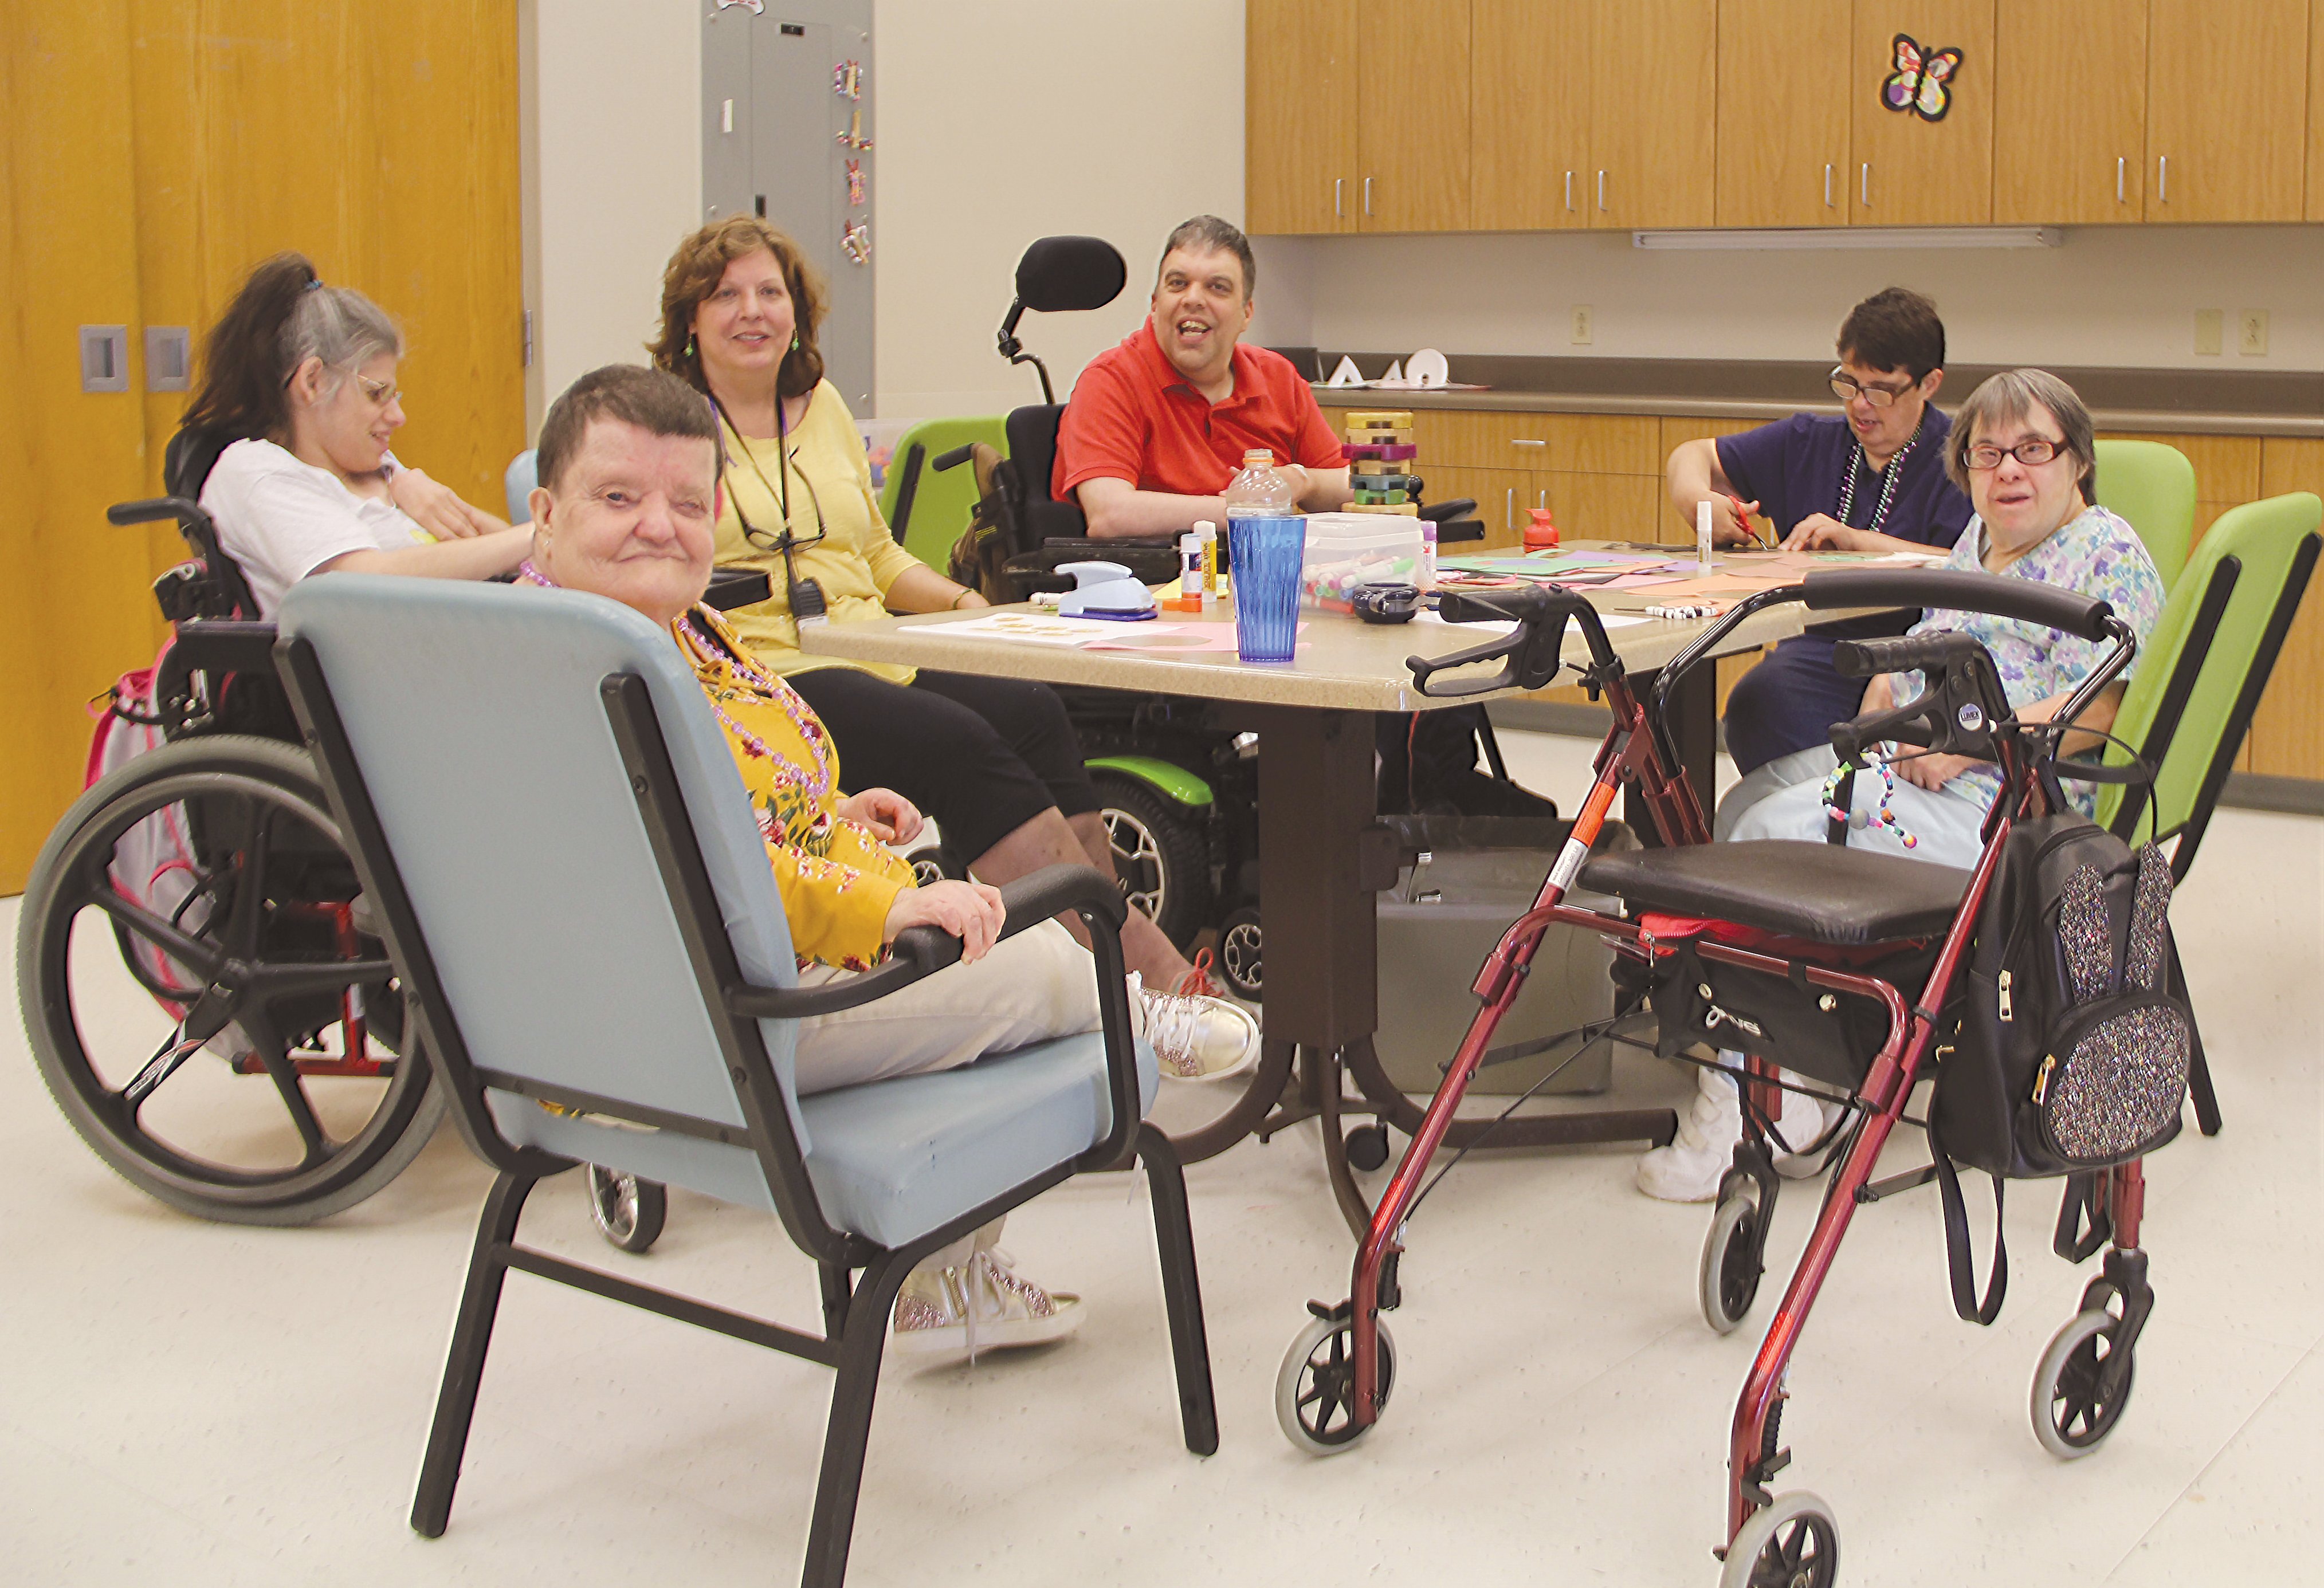 Supporting adults with disabilities to enjoy active and fulfilling lives is the mission of Goodwill’s Day Services programs, which includes encouraging independence.